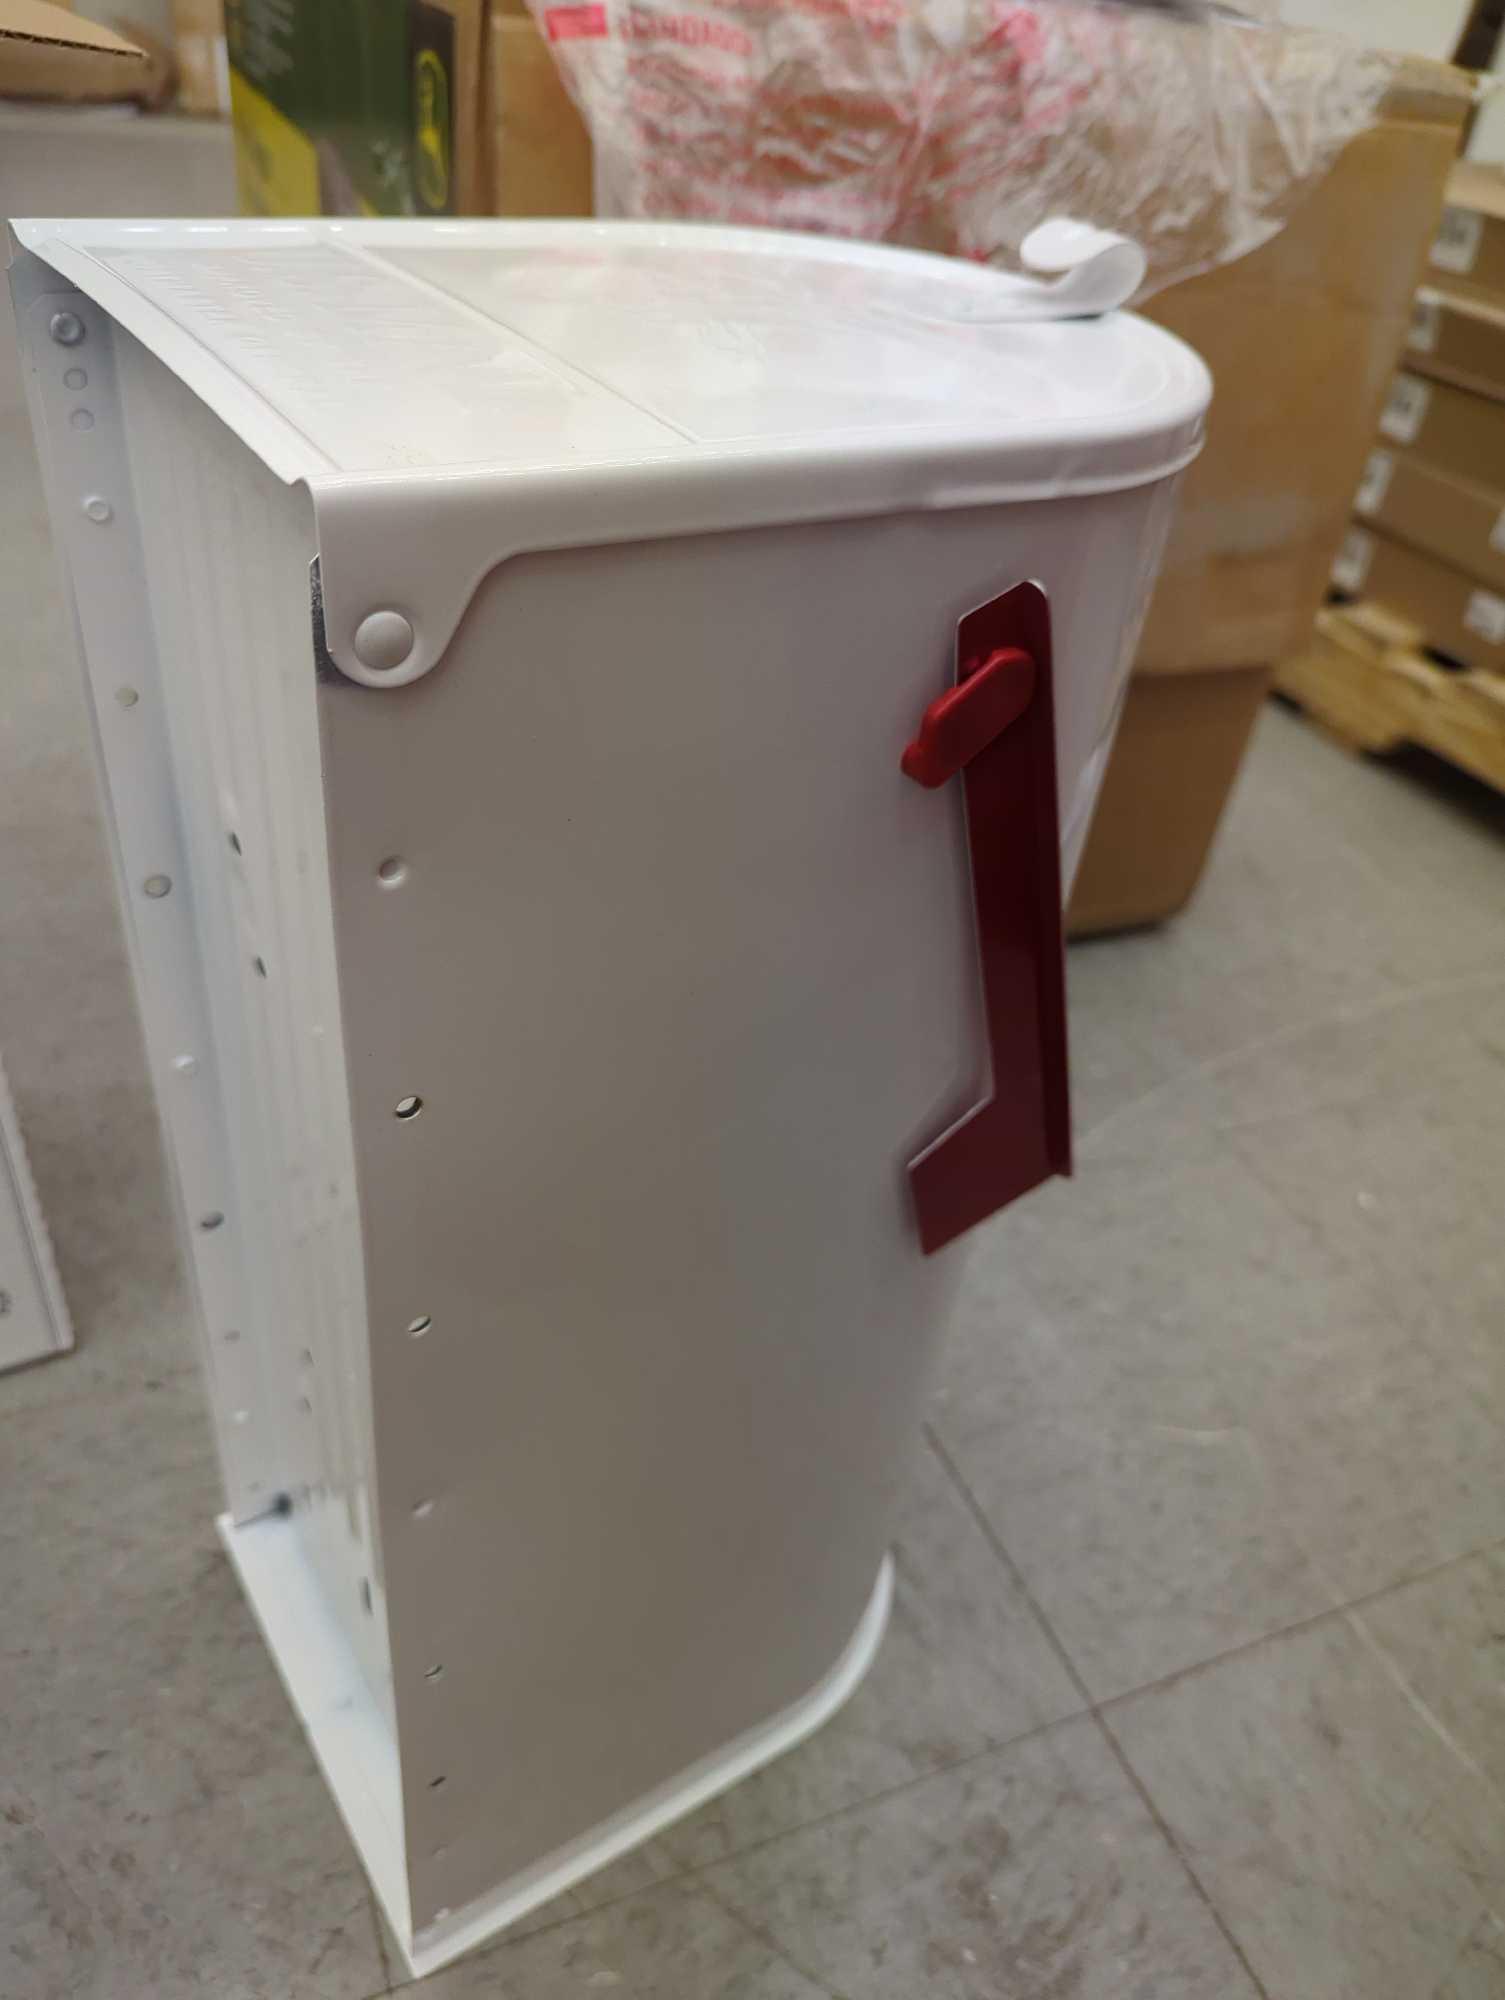 (Has some Minor Denting) Architectural Mailboxes Elite White, Large, Steel, Post Mount Mailbox,